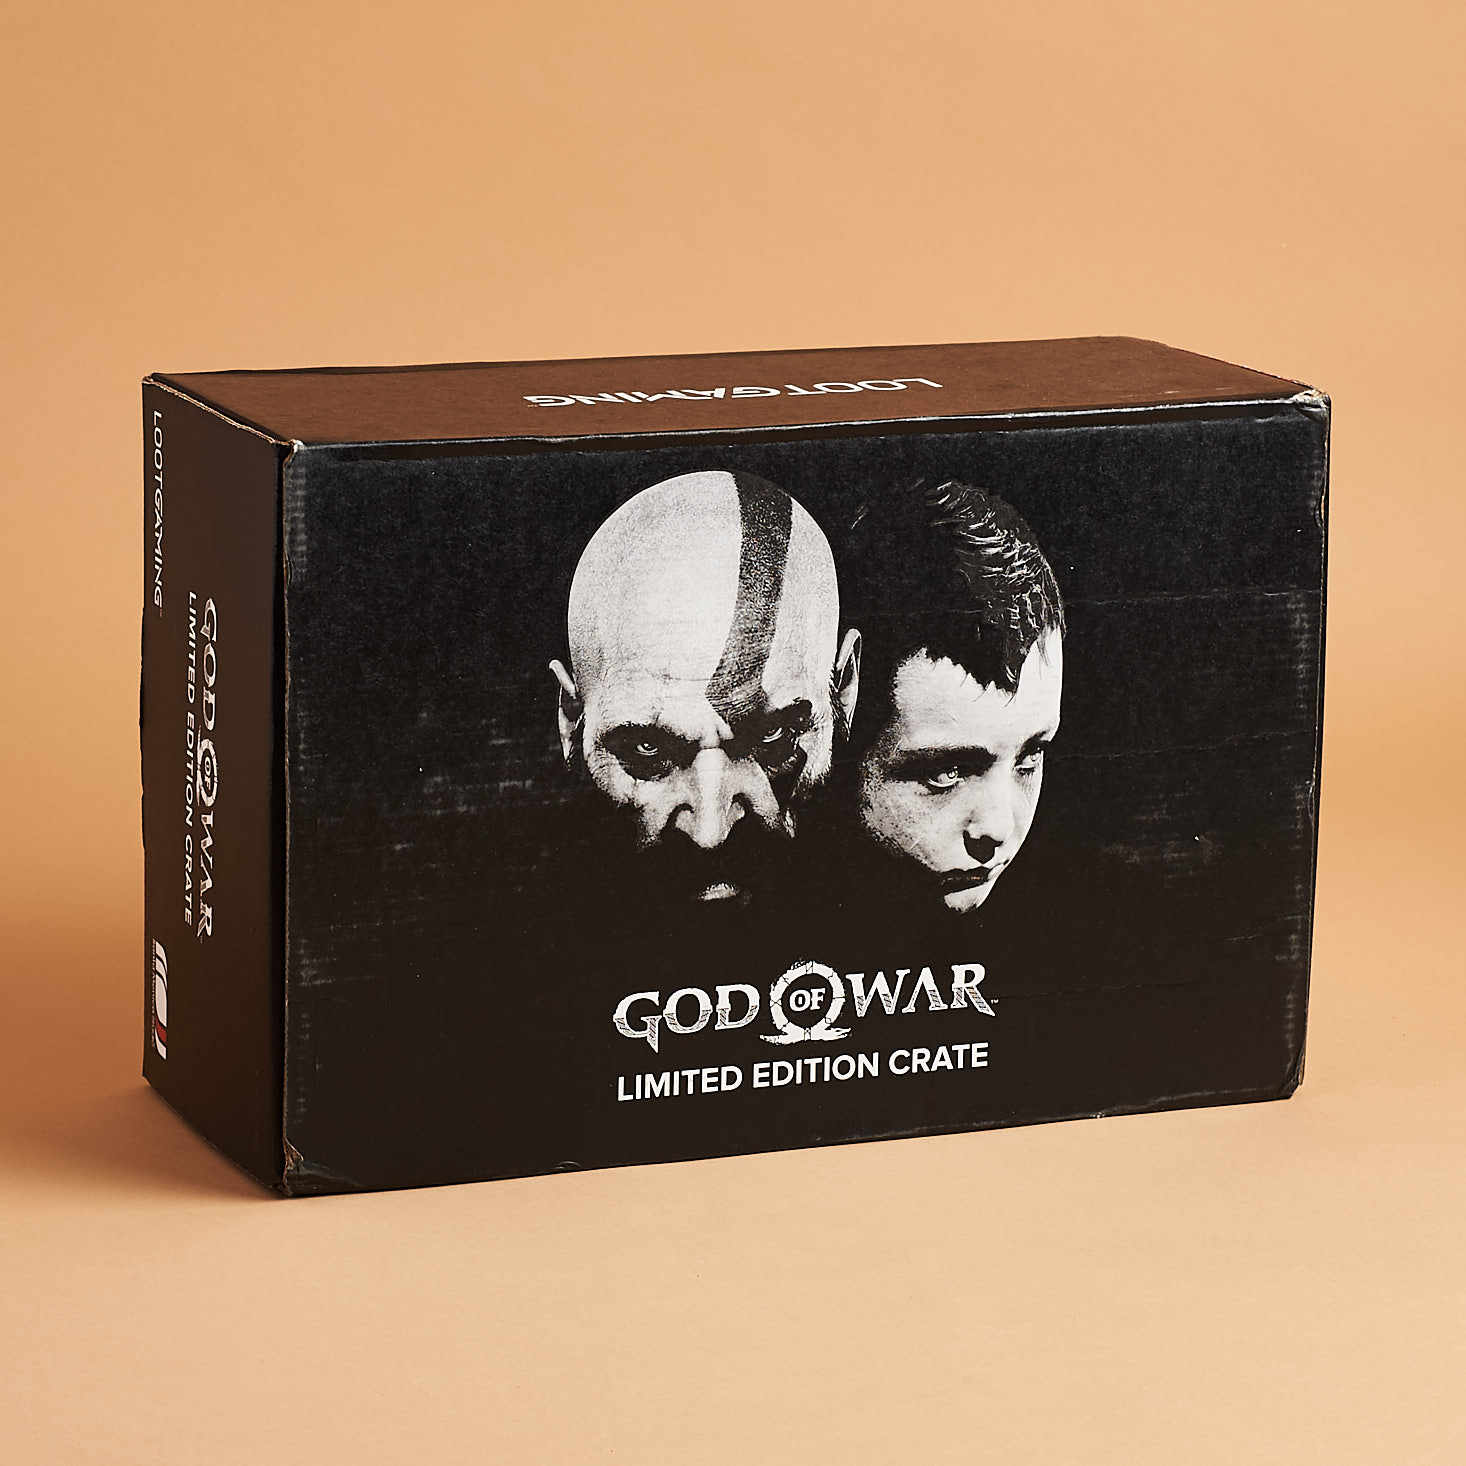 Loot Crate God of War Limited Edition Crate Review